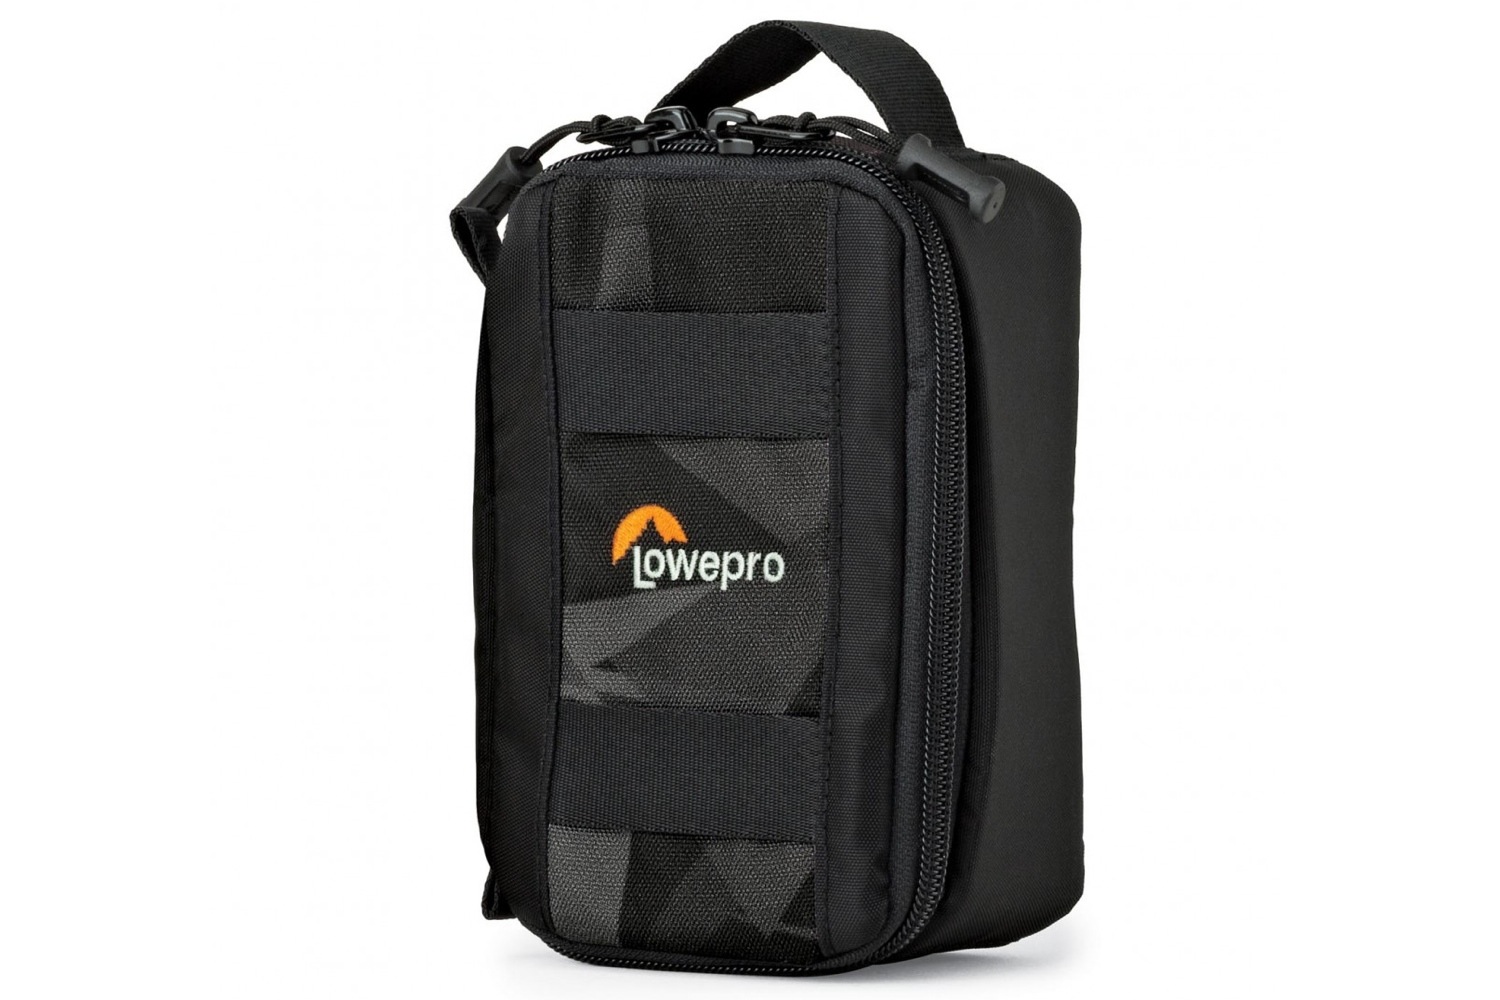 lowepro launches viewpoint bags designed to haul your action camera gear cs40 1